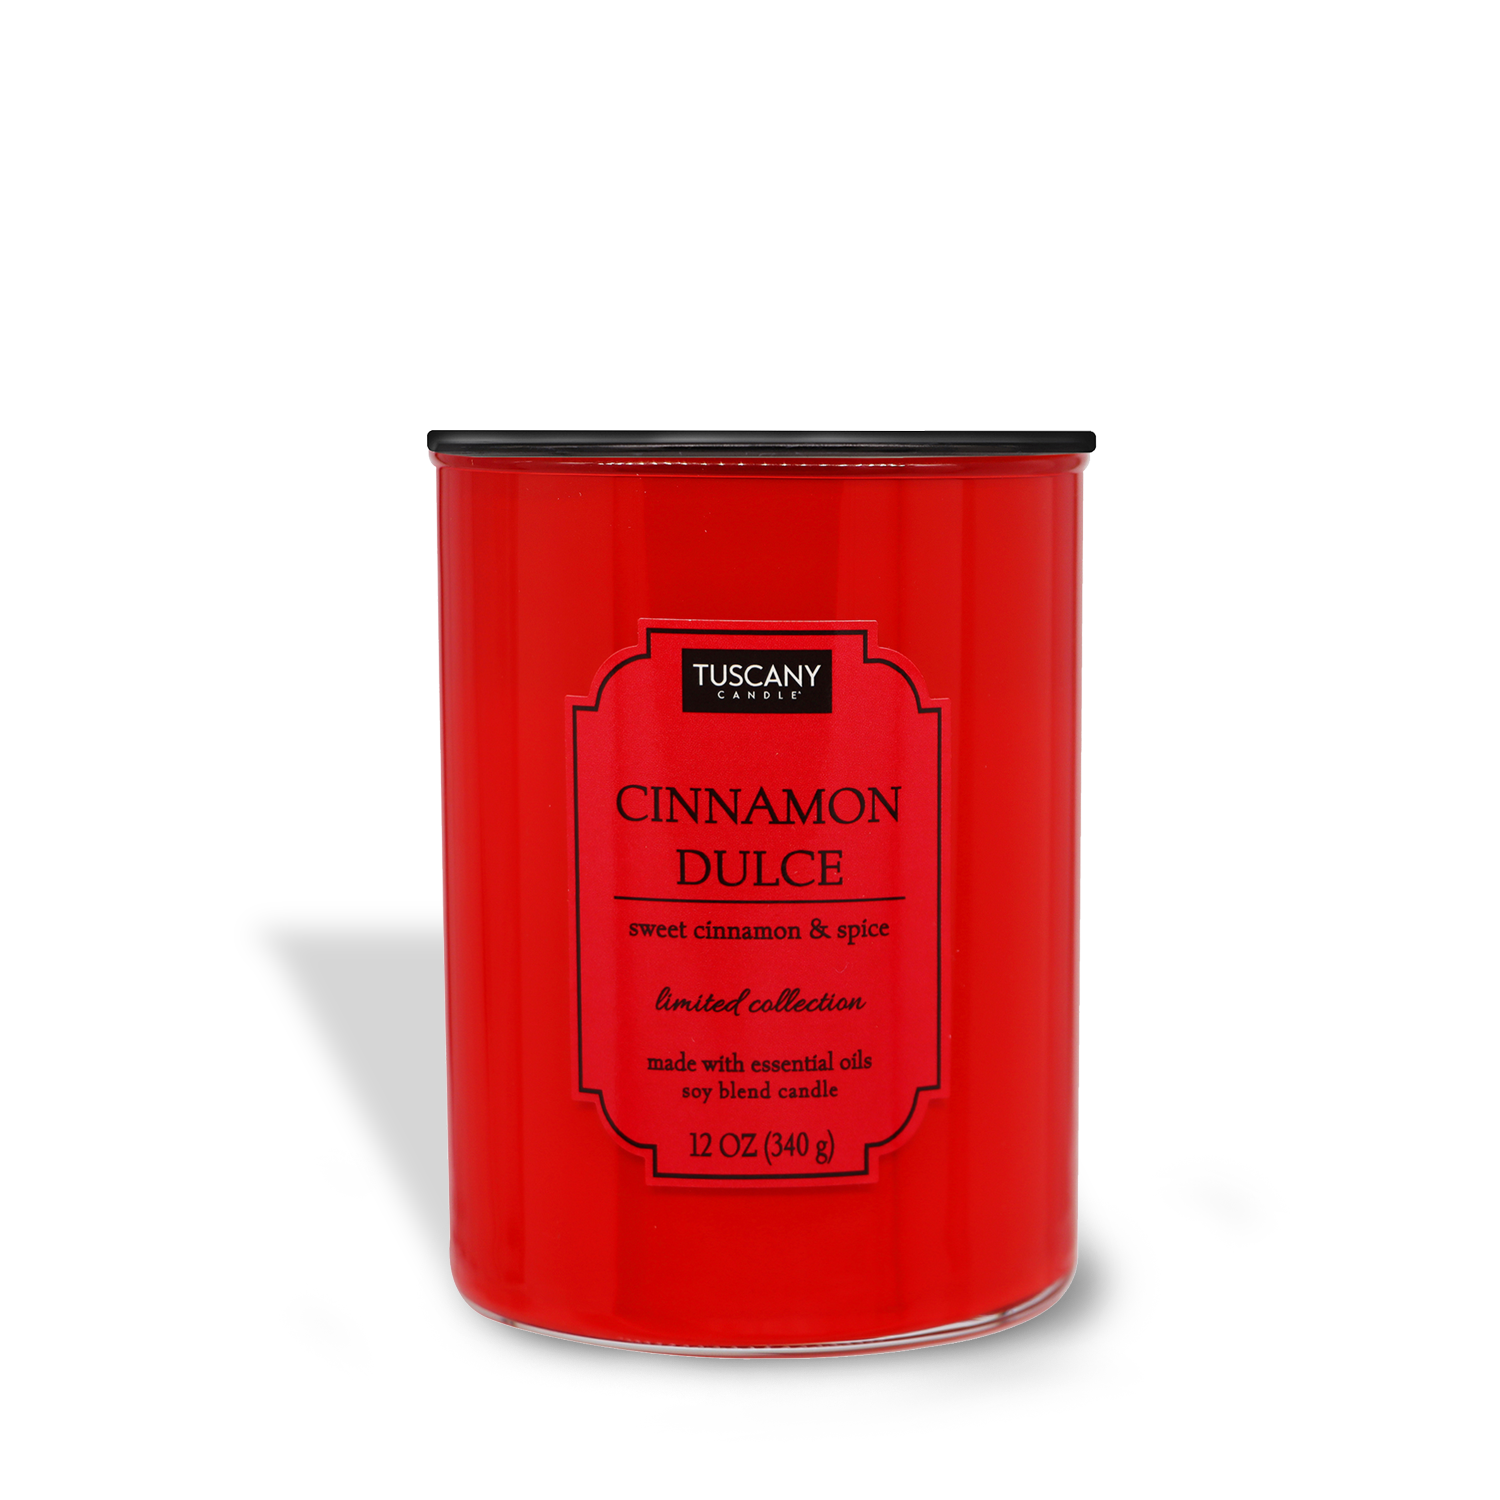 Red Tuscany Candle® EVD tin labeled "Cinnamon Dulce (12 oz) candle," with a description of sweet cinnamon and spice, from the Colorsplash collection.